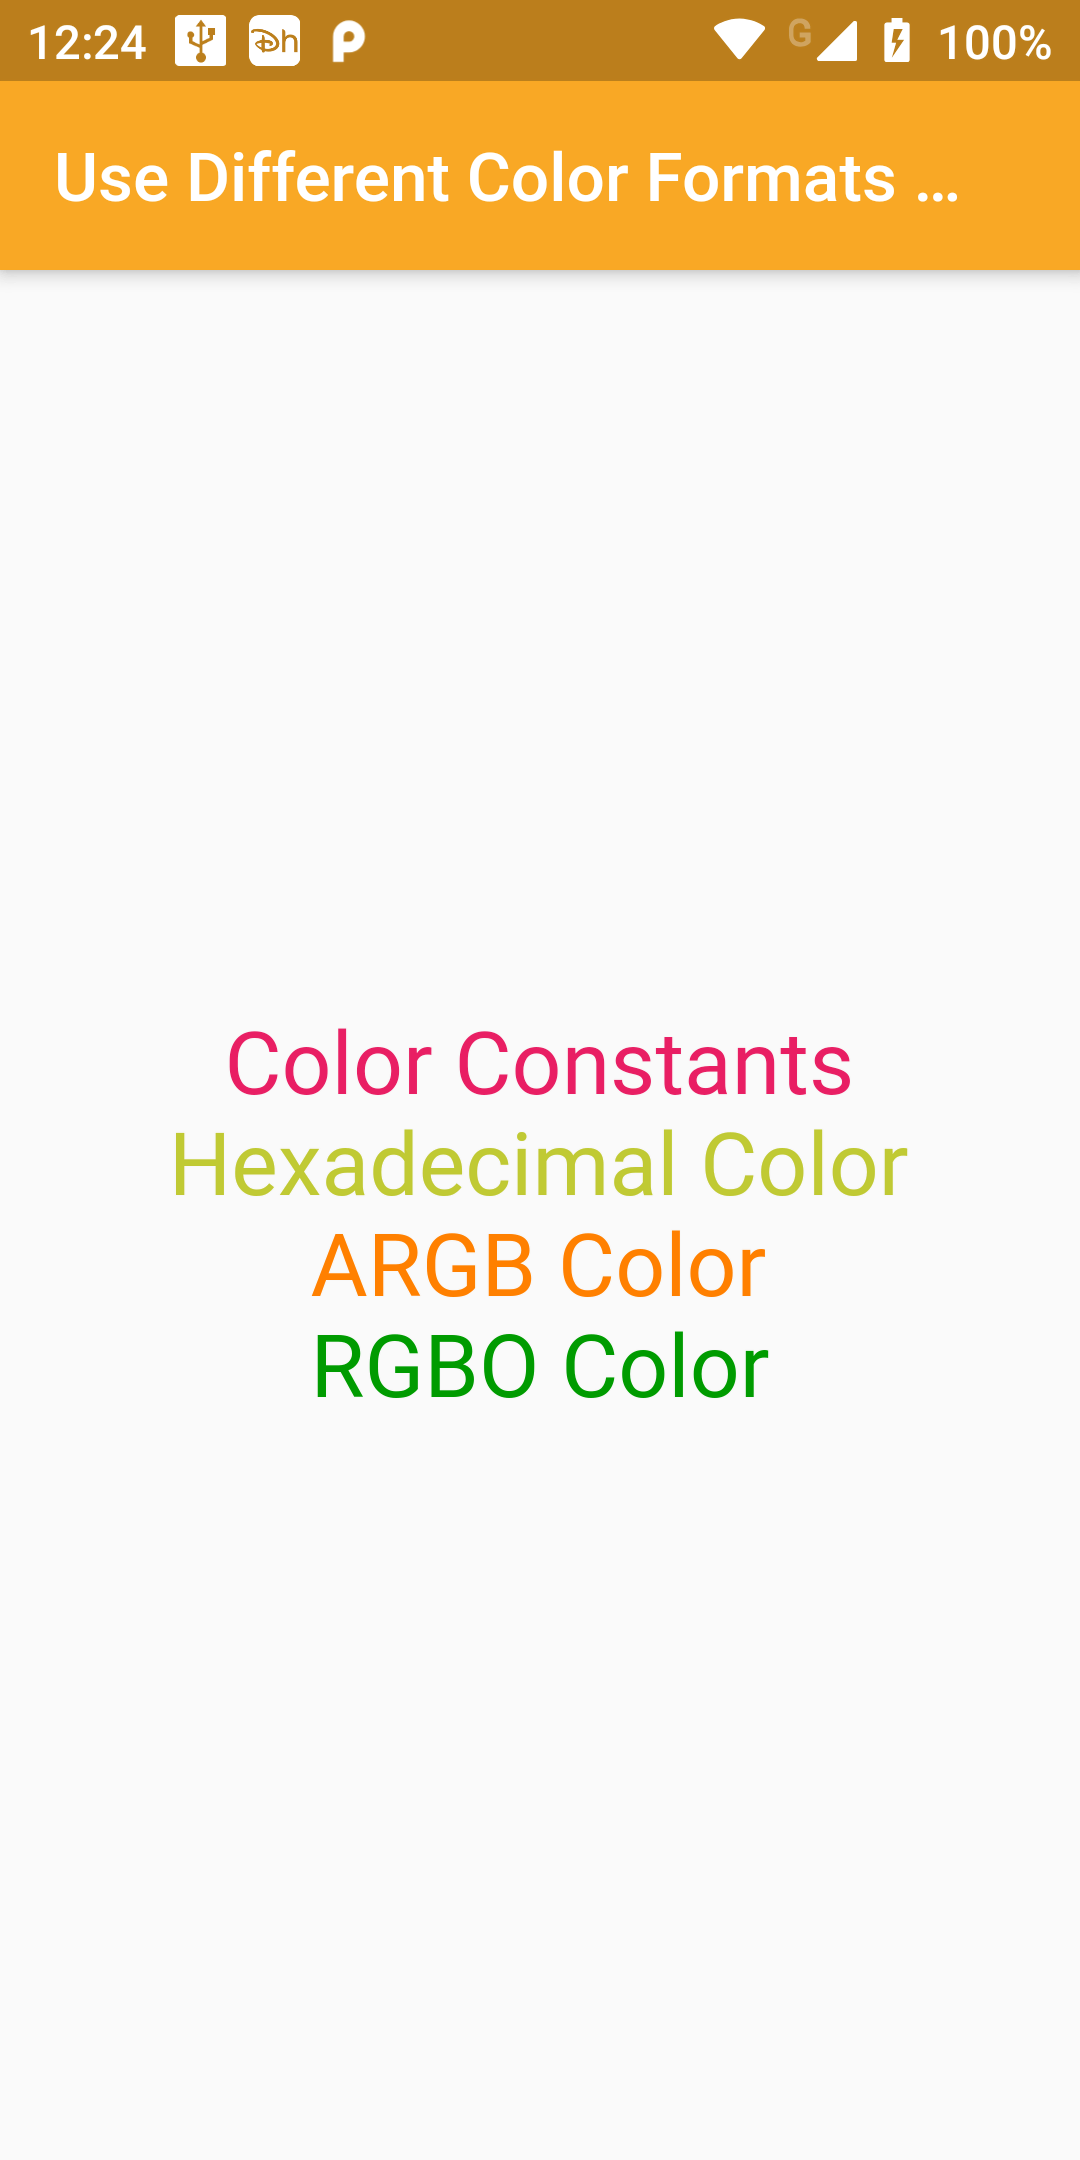 How To Use Different Color Formats Hex Argb Rgbo In Flutter